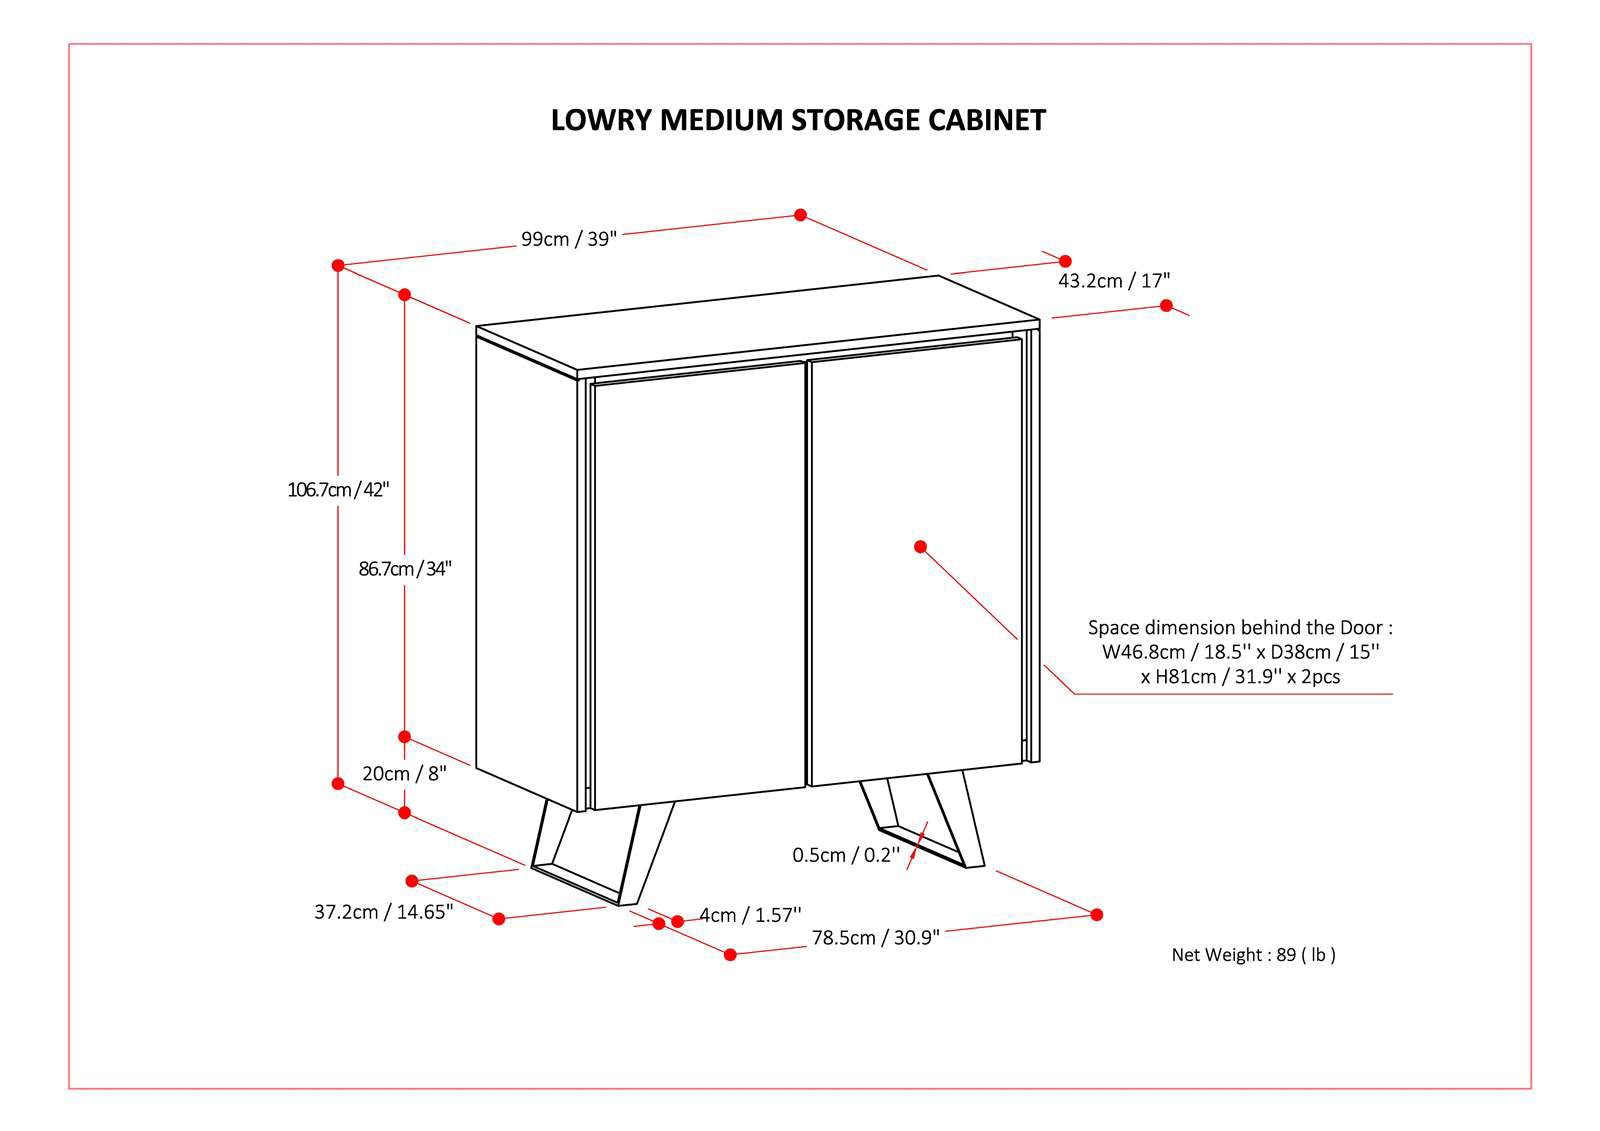 Medium Storage Cabinet with 4 Adjustable Shelves and 2 Doors - Storage Cabinets